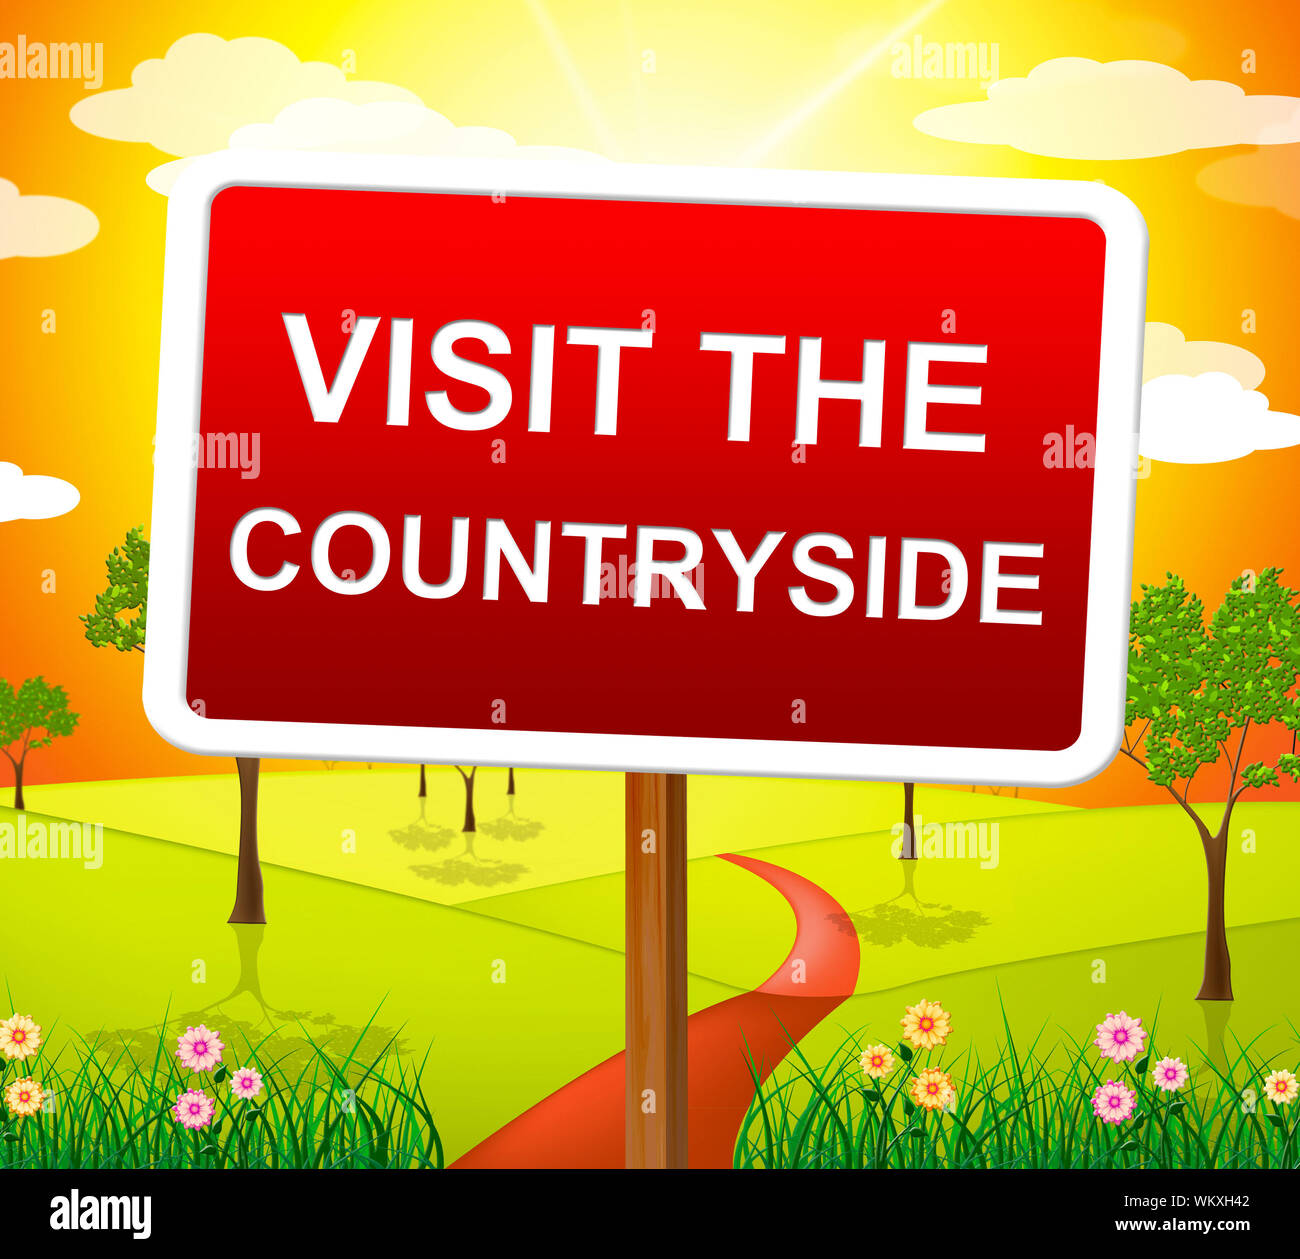 Visit The Countryside Meaning Picturesque Placard And Display Stock